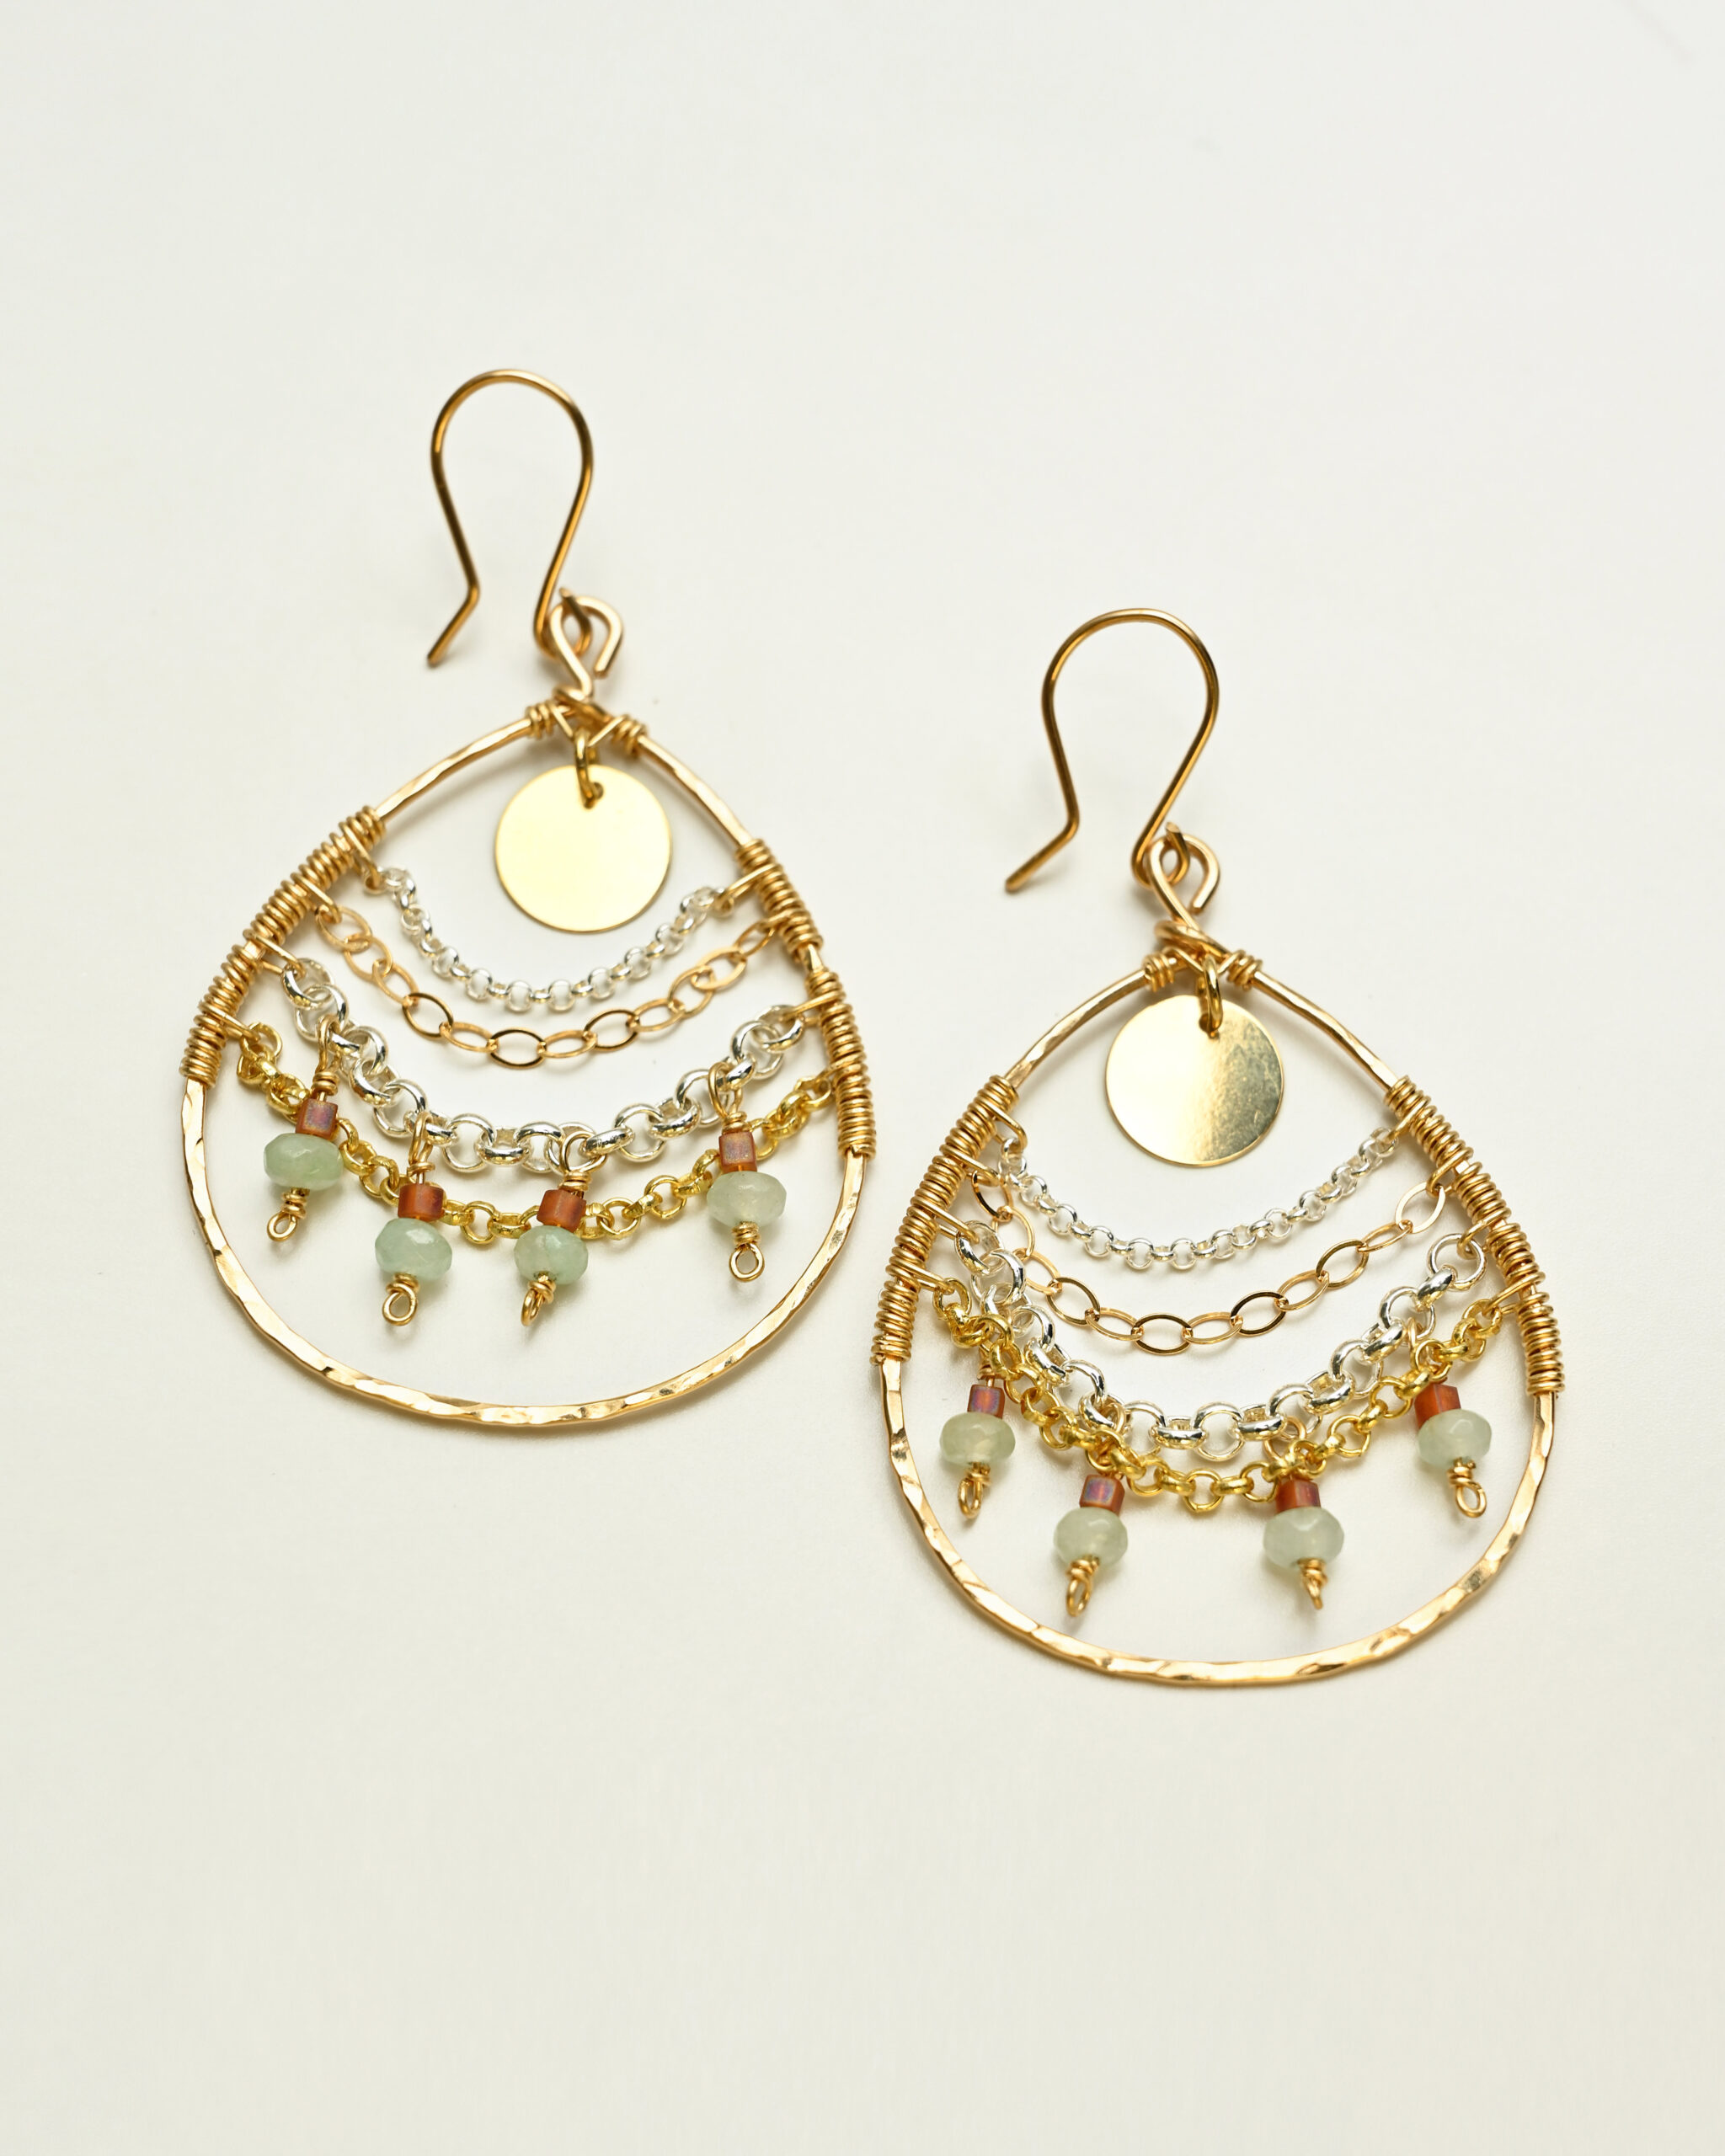 14k gold filled drop earrings with amazonite, AG 925 and gold plated chains